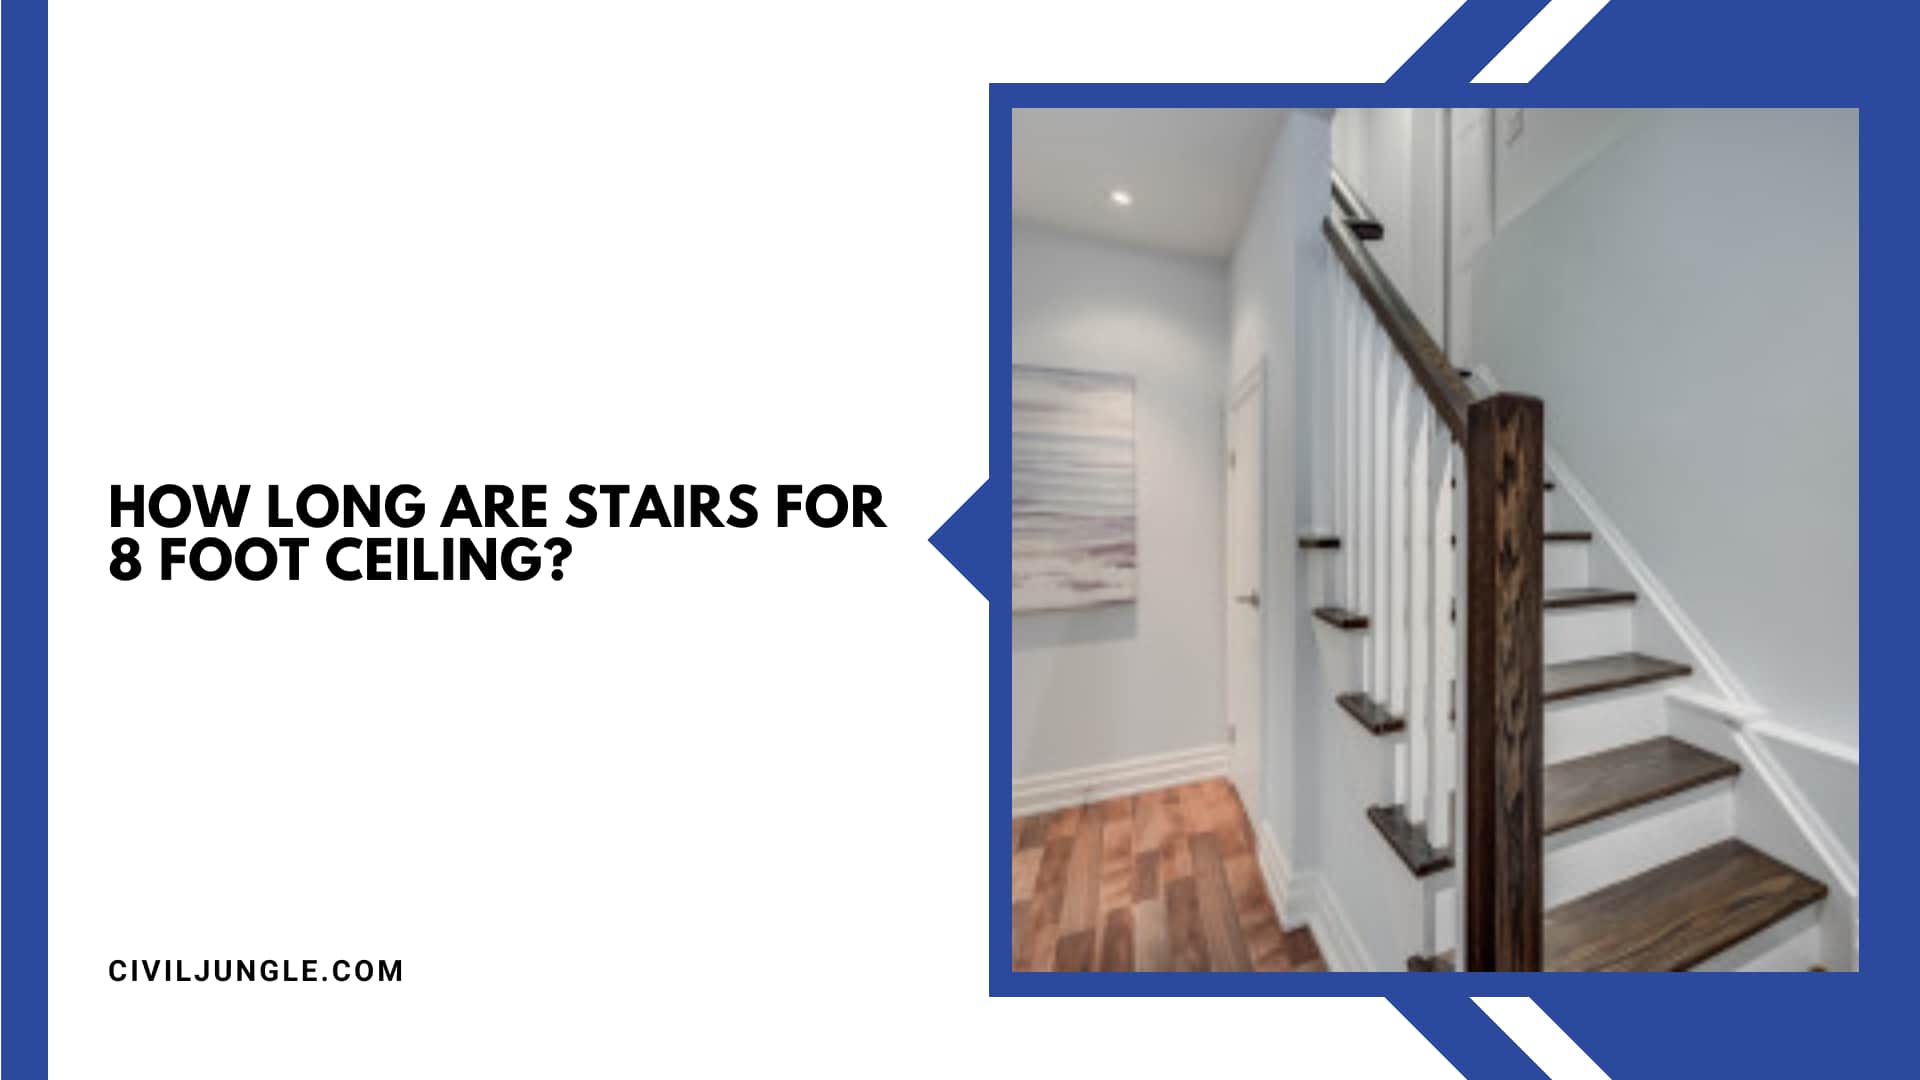 How Long Are Stairs for 8 Foot Ceiling?